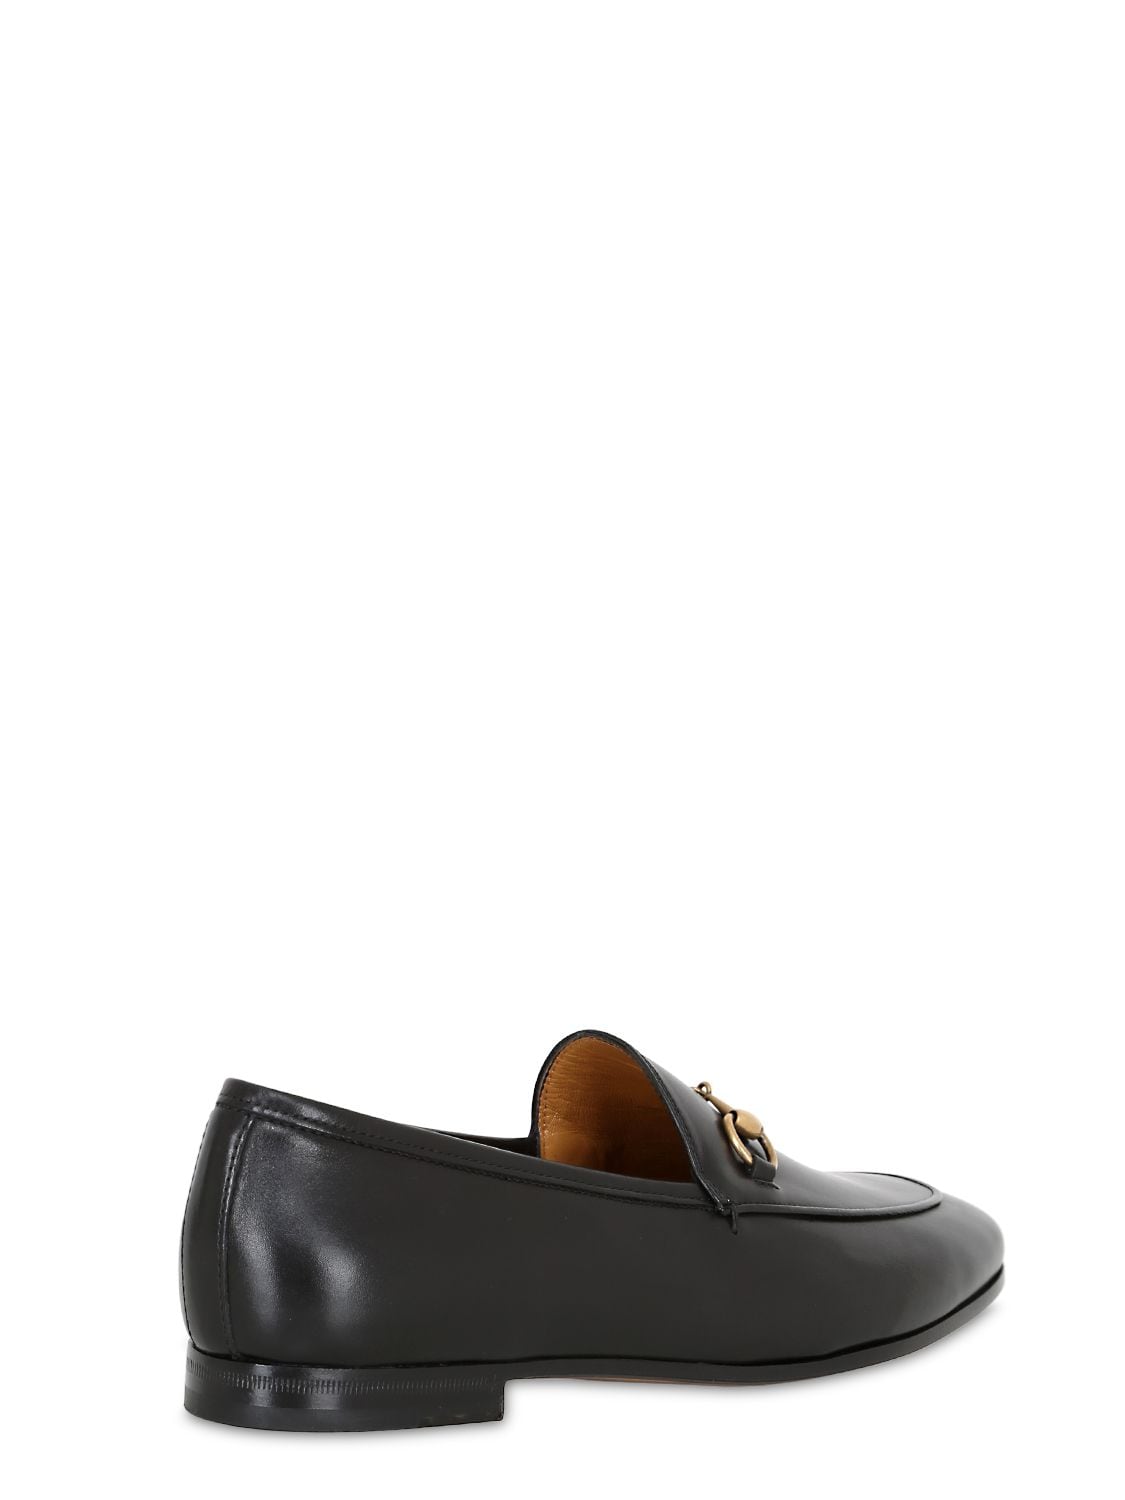 Gucci Jordaan Leather Loafers In Black | ModeSens